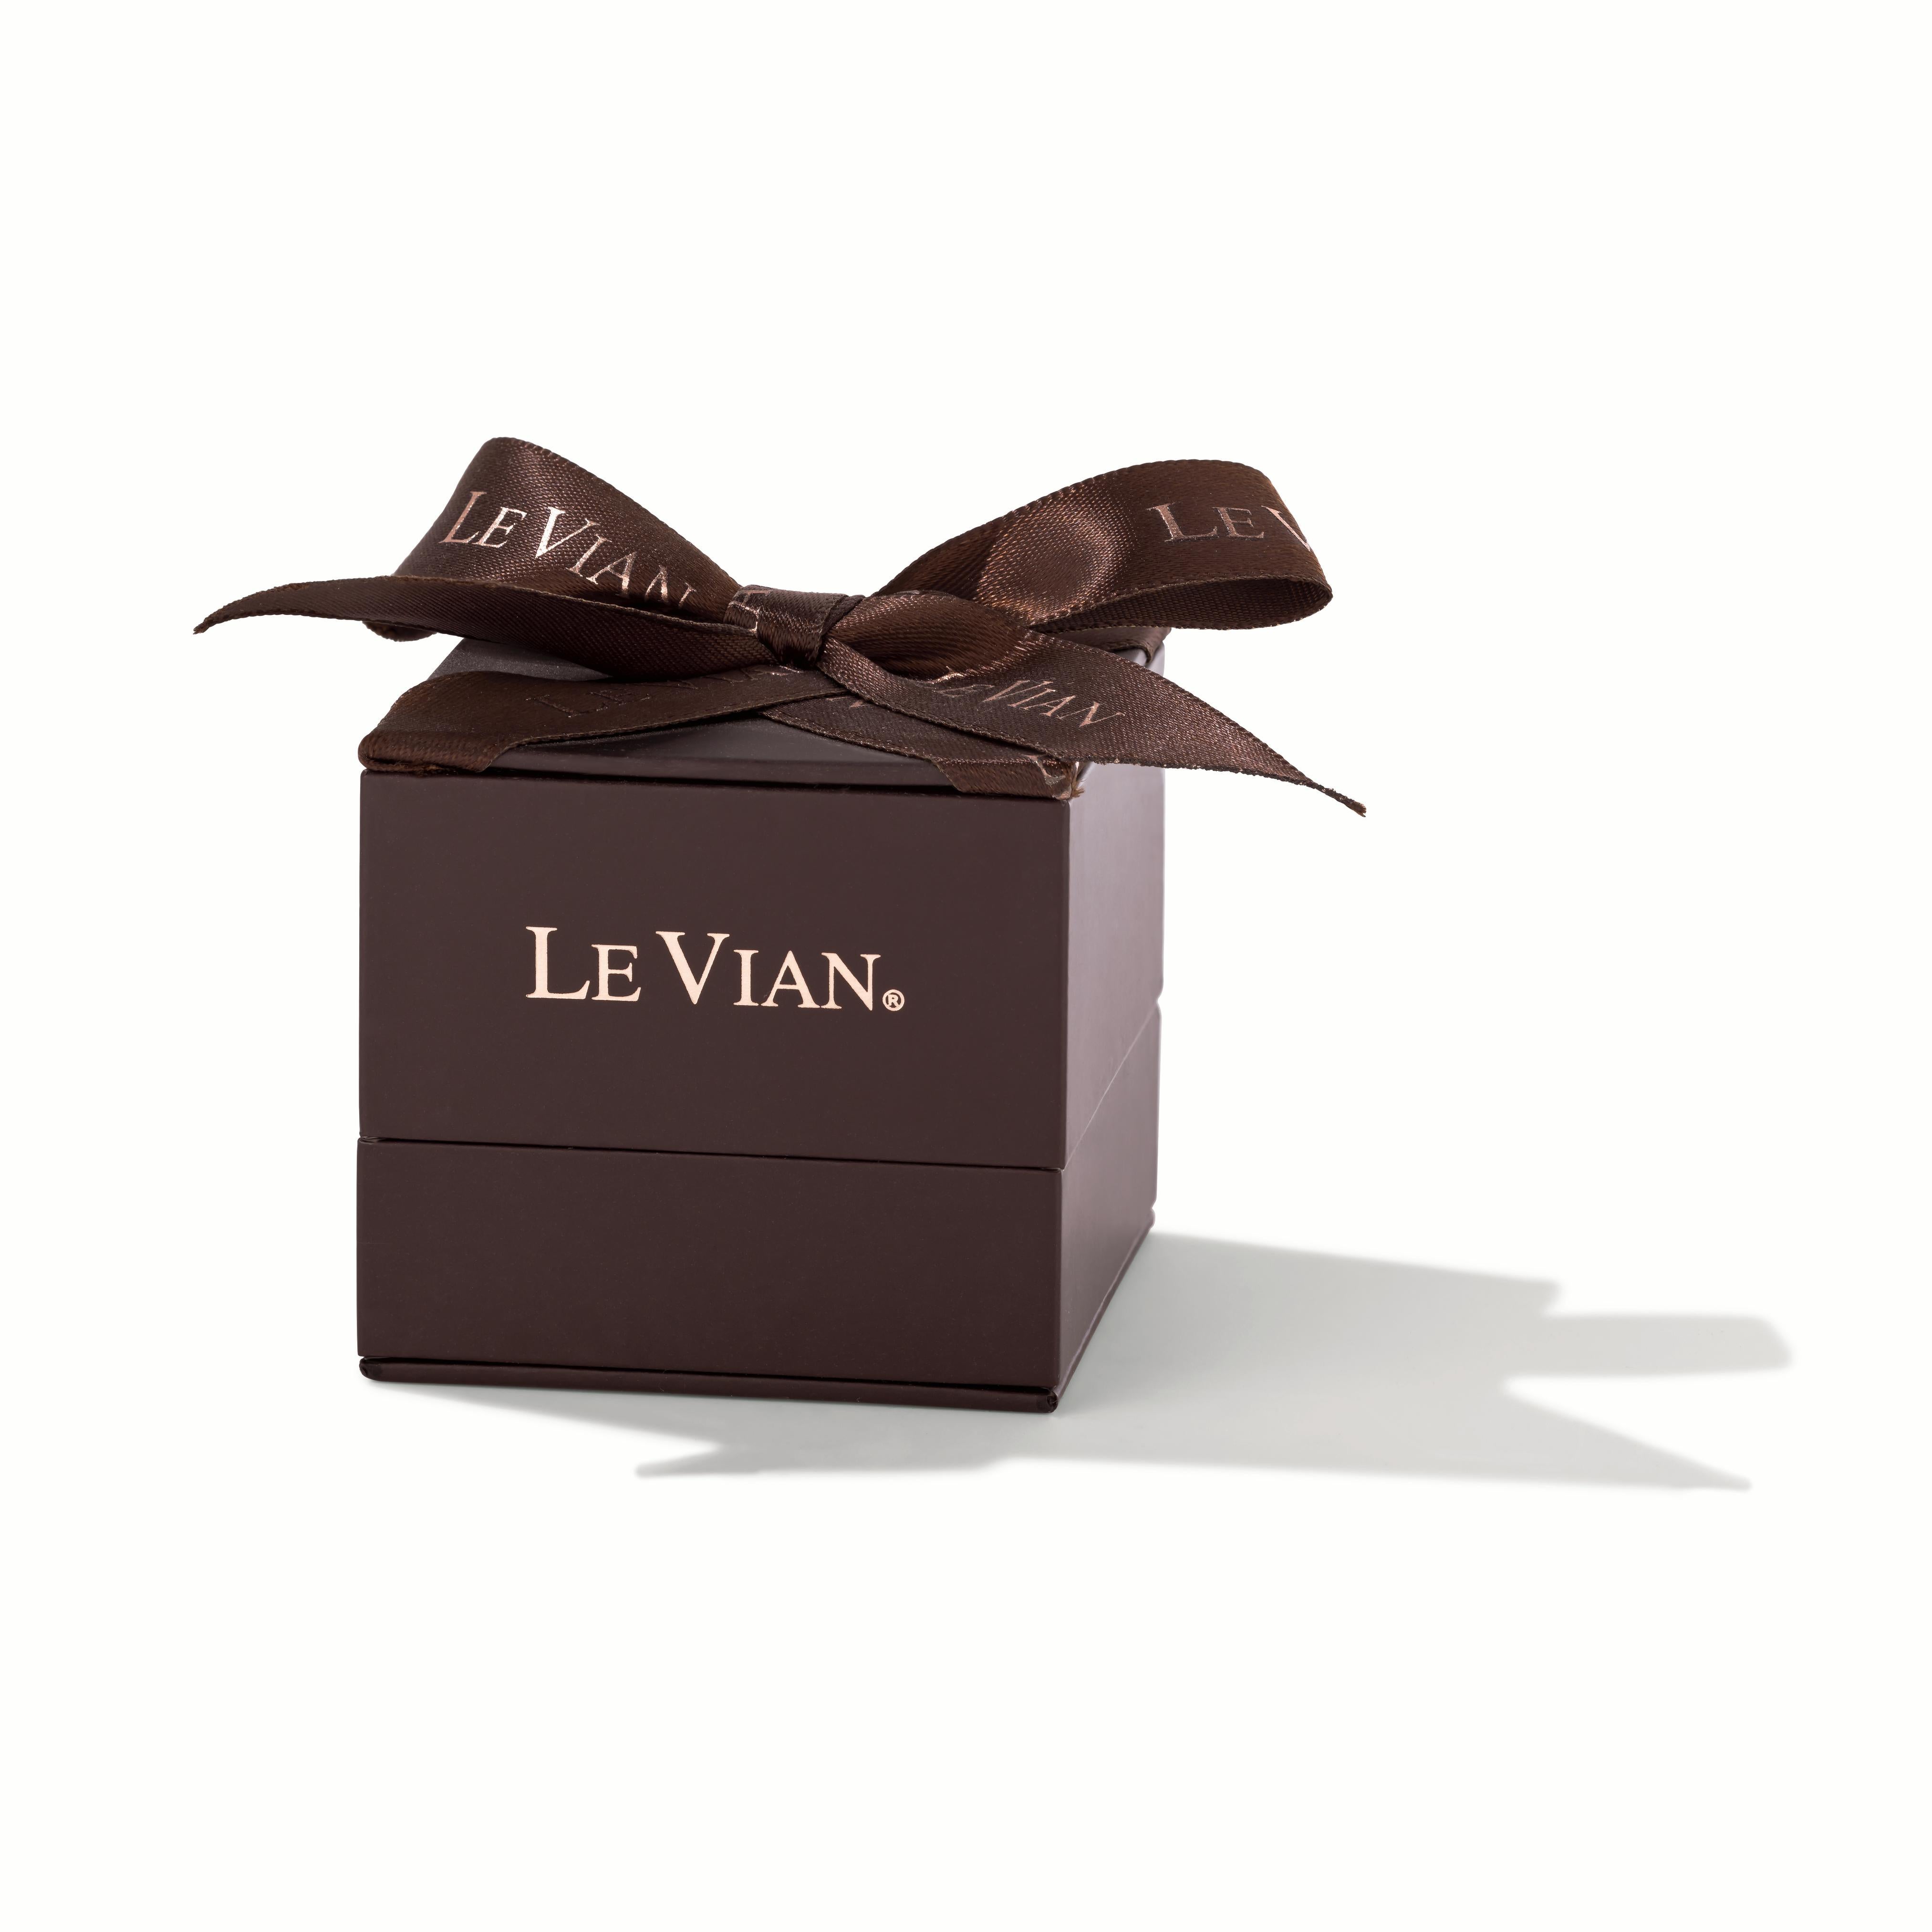 Le Vian® Pendant featuring 4.28 cts Vanilla Diamonds® set in 14K Honey Gold™

Diamonds Breakdown:
4.28 cts White Diamonds

Gems Breakdown:
None

Item comes with a Le Vian® jewelry box as well as a Le Vian® suede pouch

FREE SHIPPING & FREE 30 DAY